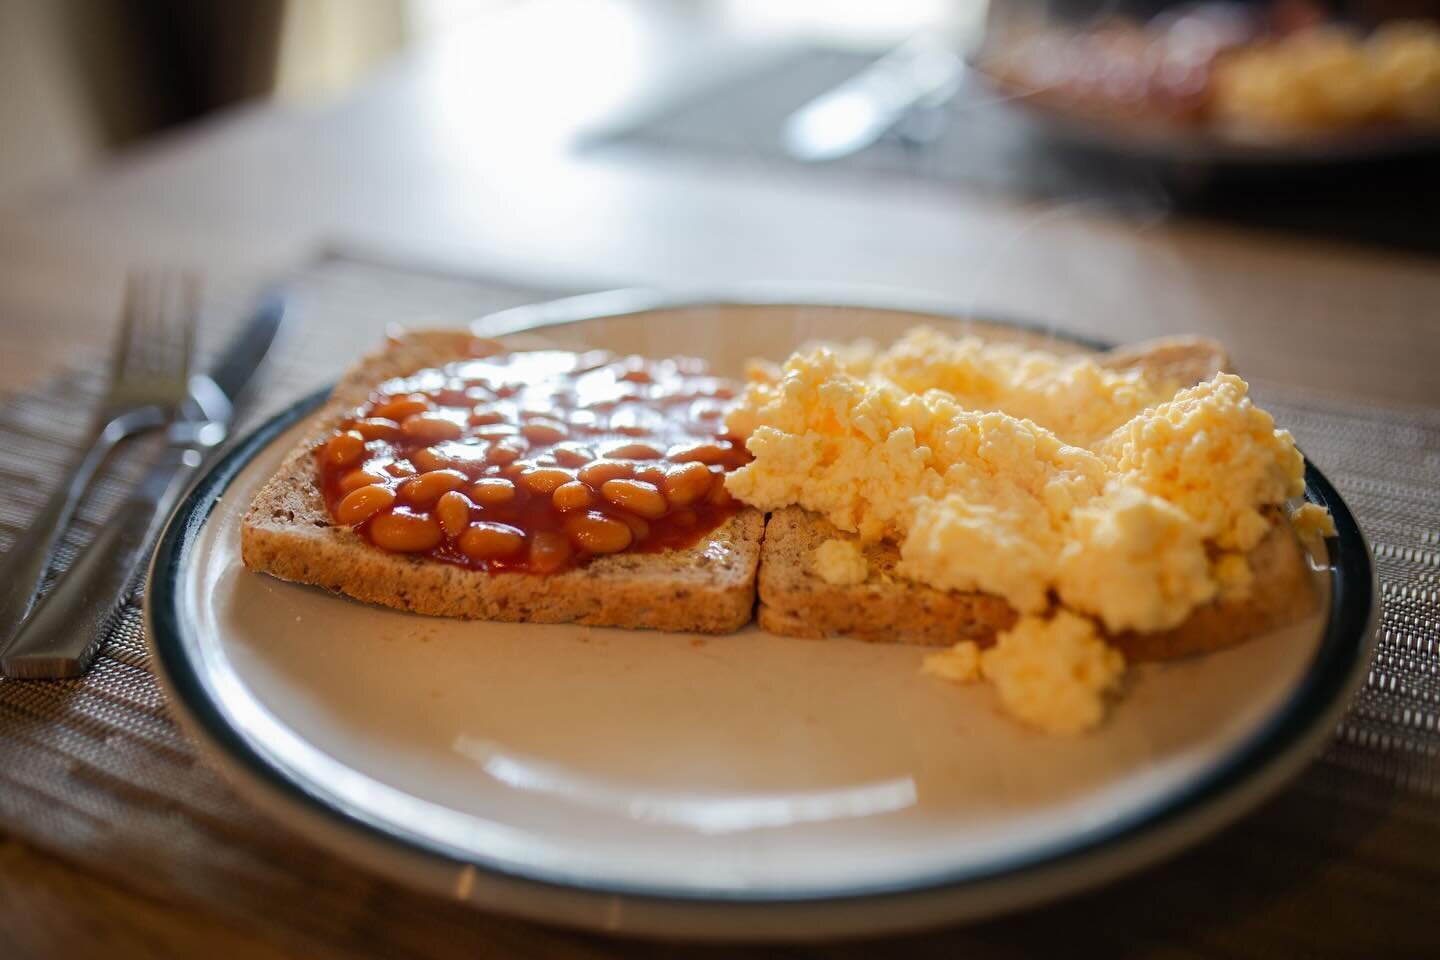 As I woke up today, still in bed, I was thinking about my sister making our brother and I eggs and beans on toast. Maybe it sounds simple, but it was such a sweet moment of my sister embracing that she could care for us like that during our trip.

Ou